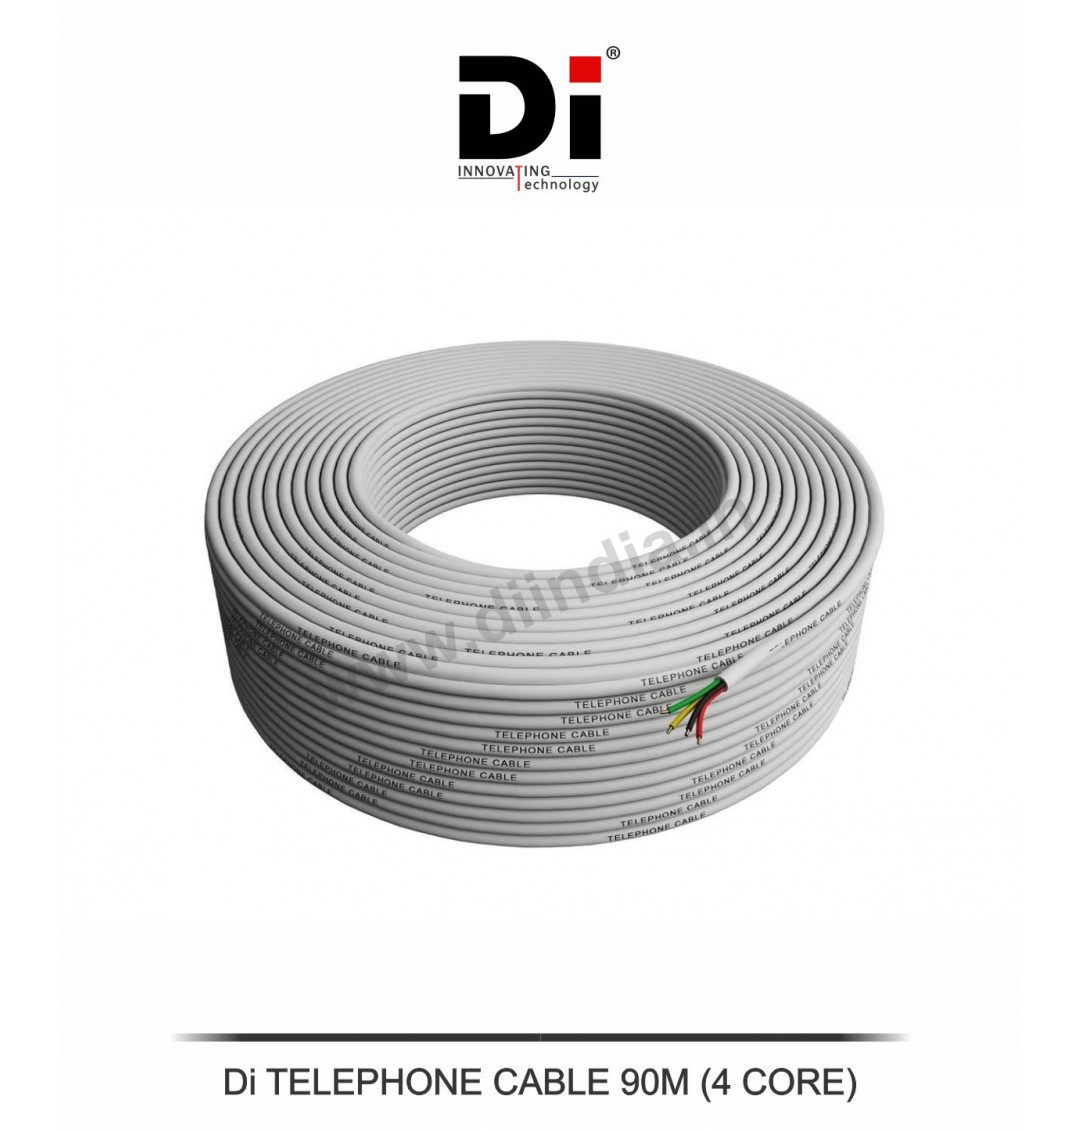 TELEPHONE CABLE 90M (4 CORE)